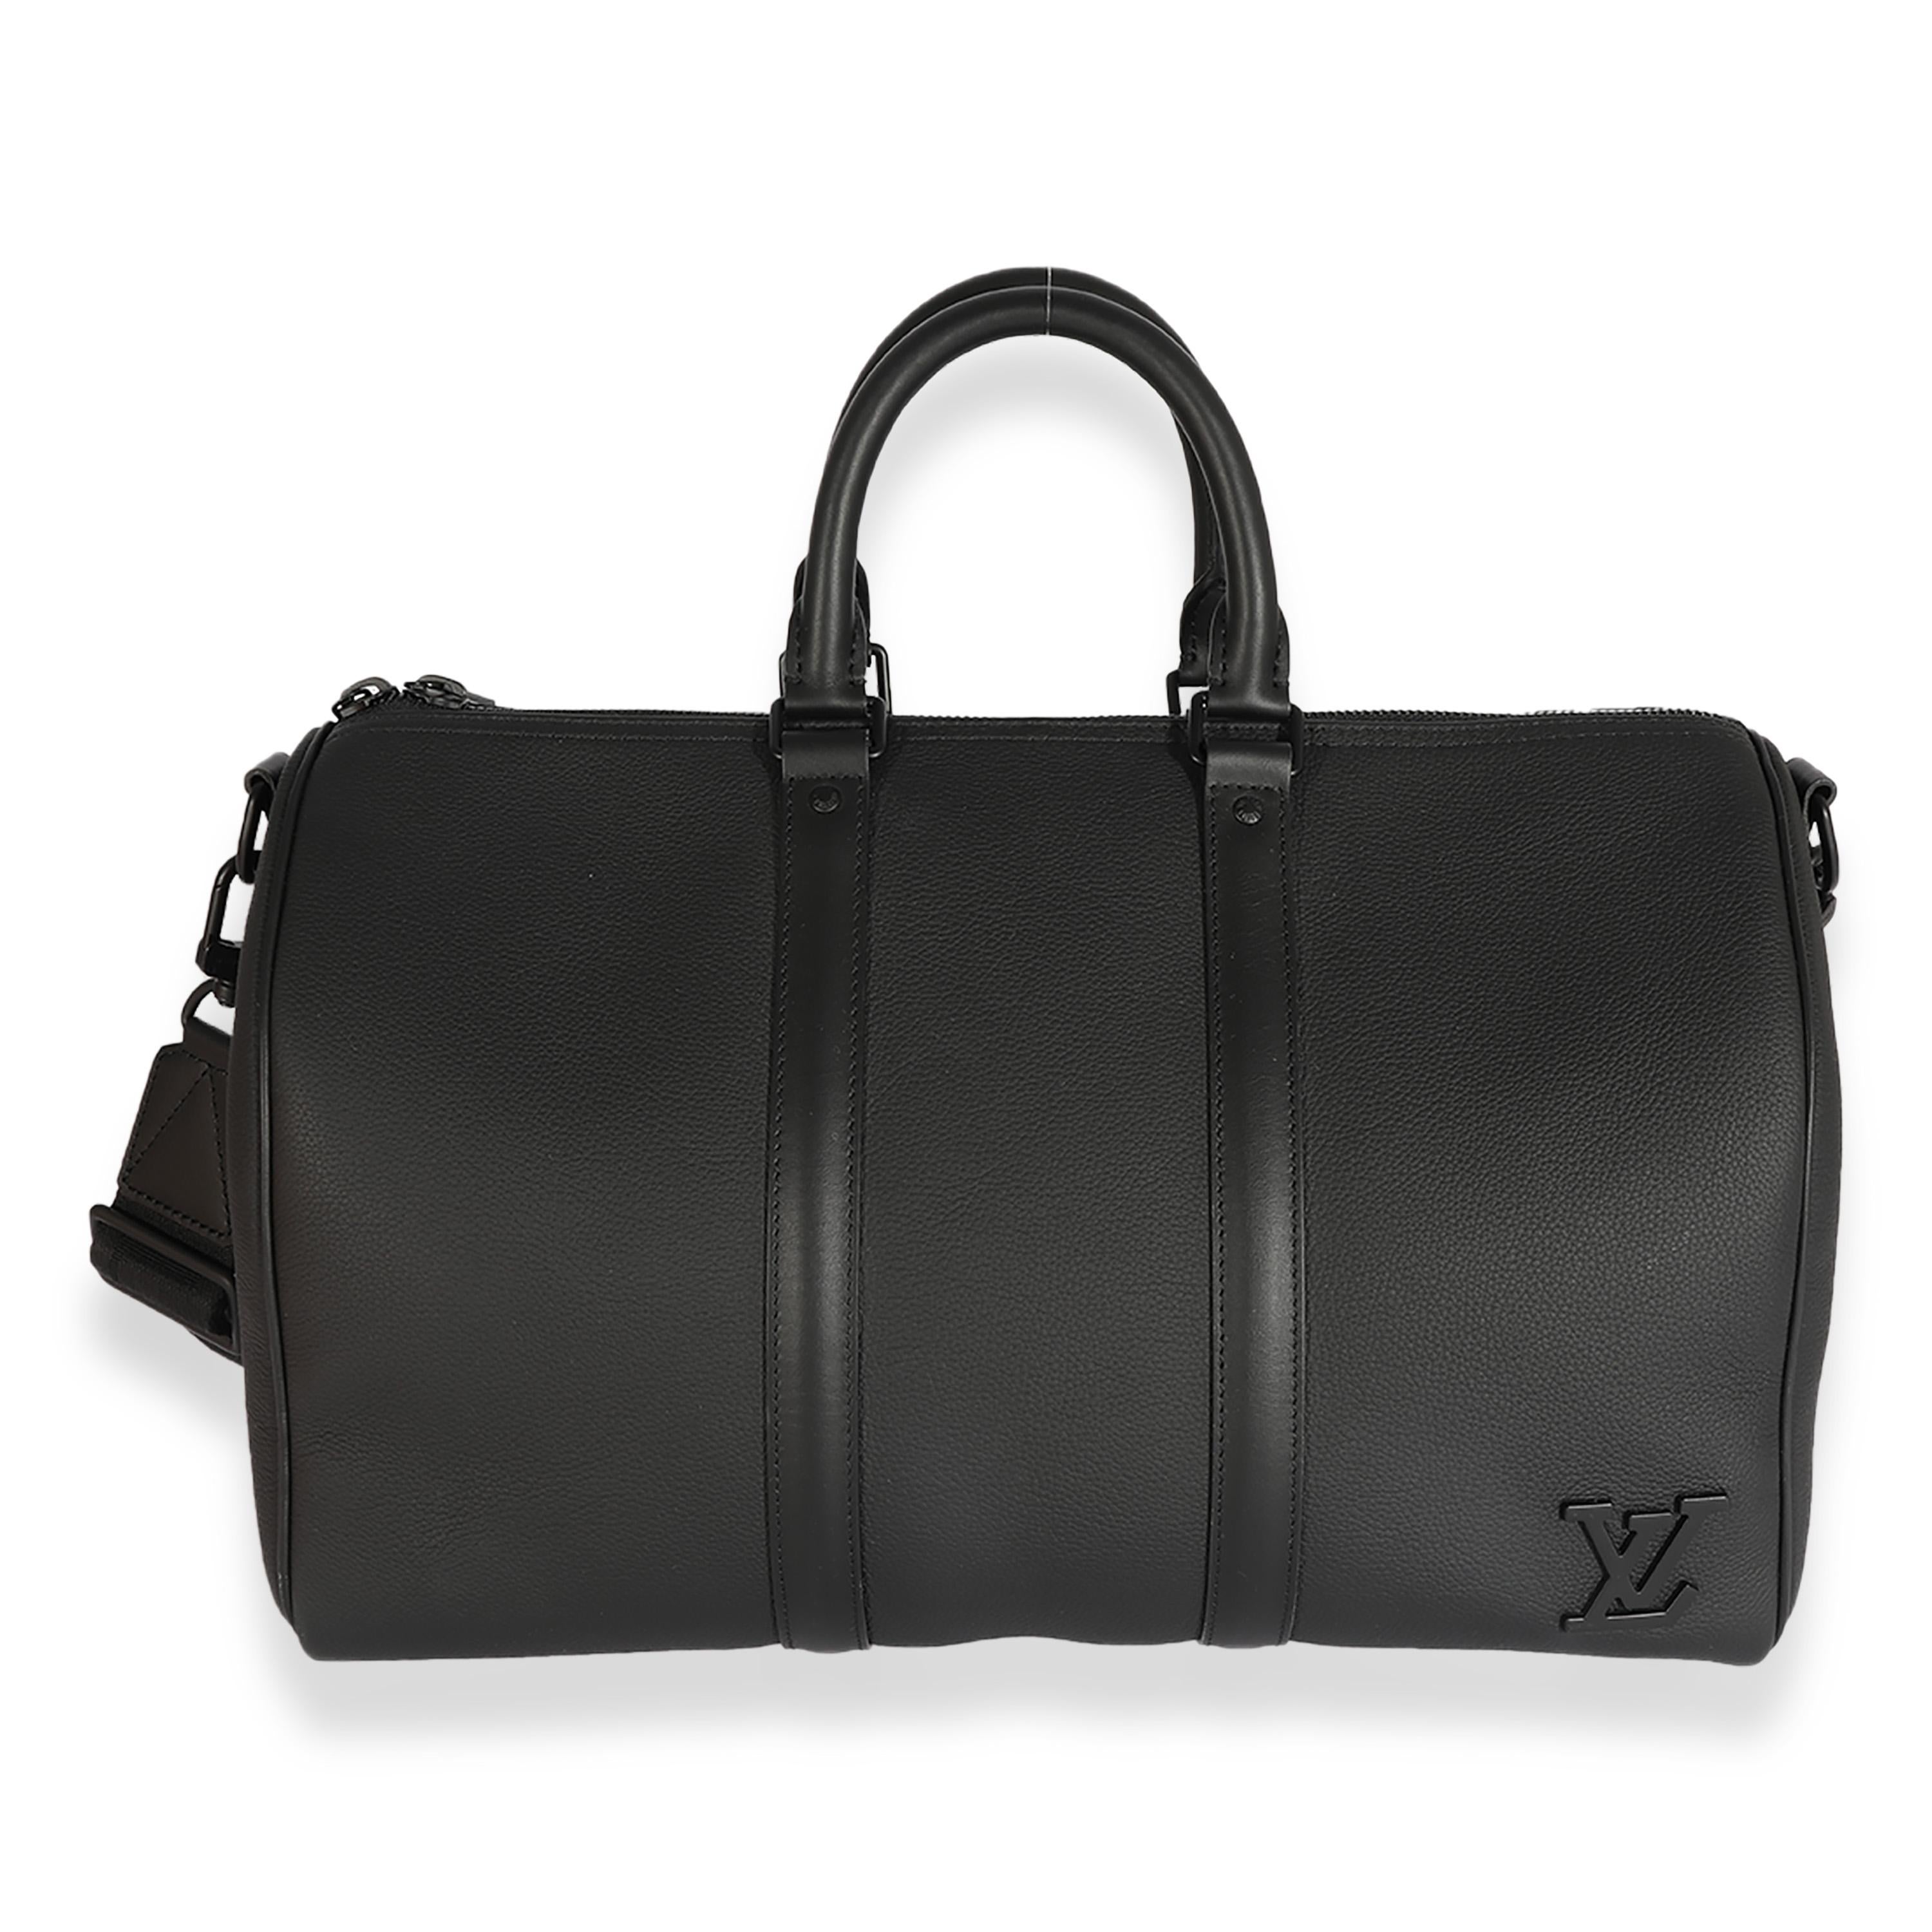 Listing Title: Louis Vuitton Black Grained Calfskin Aerogram Keepall Bandoulière 40
SKU: 124601
MSRP: 3450.00
Condition: Pre-owned 
Handbag Condition: Very Good
Condition Comments: Very Good Condition. Lights scuffing and marks at exterior. Scuffing